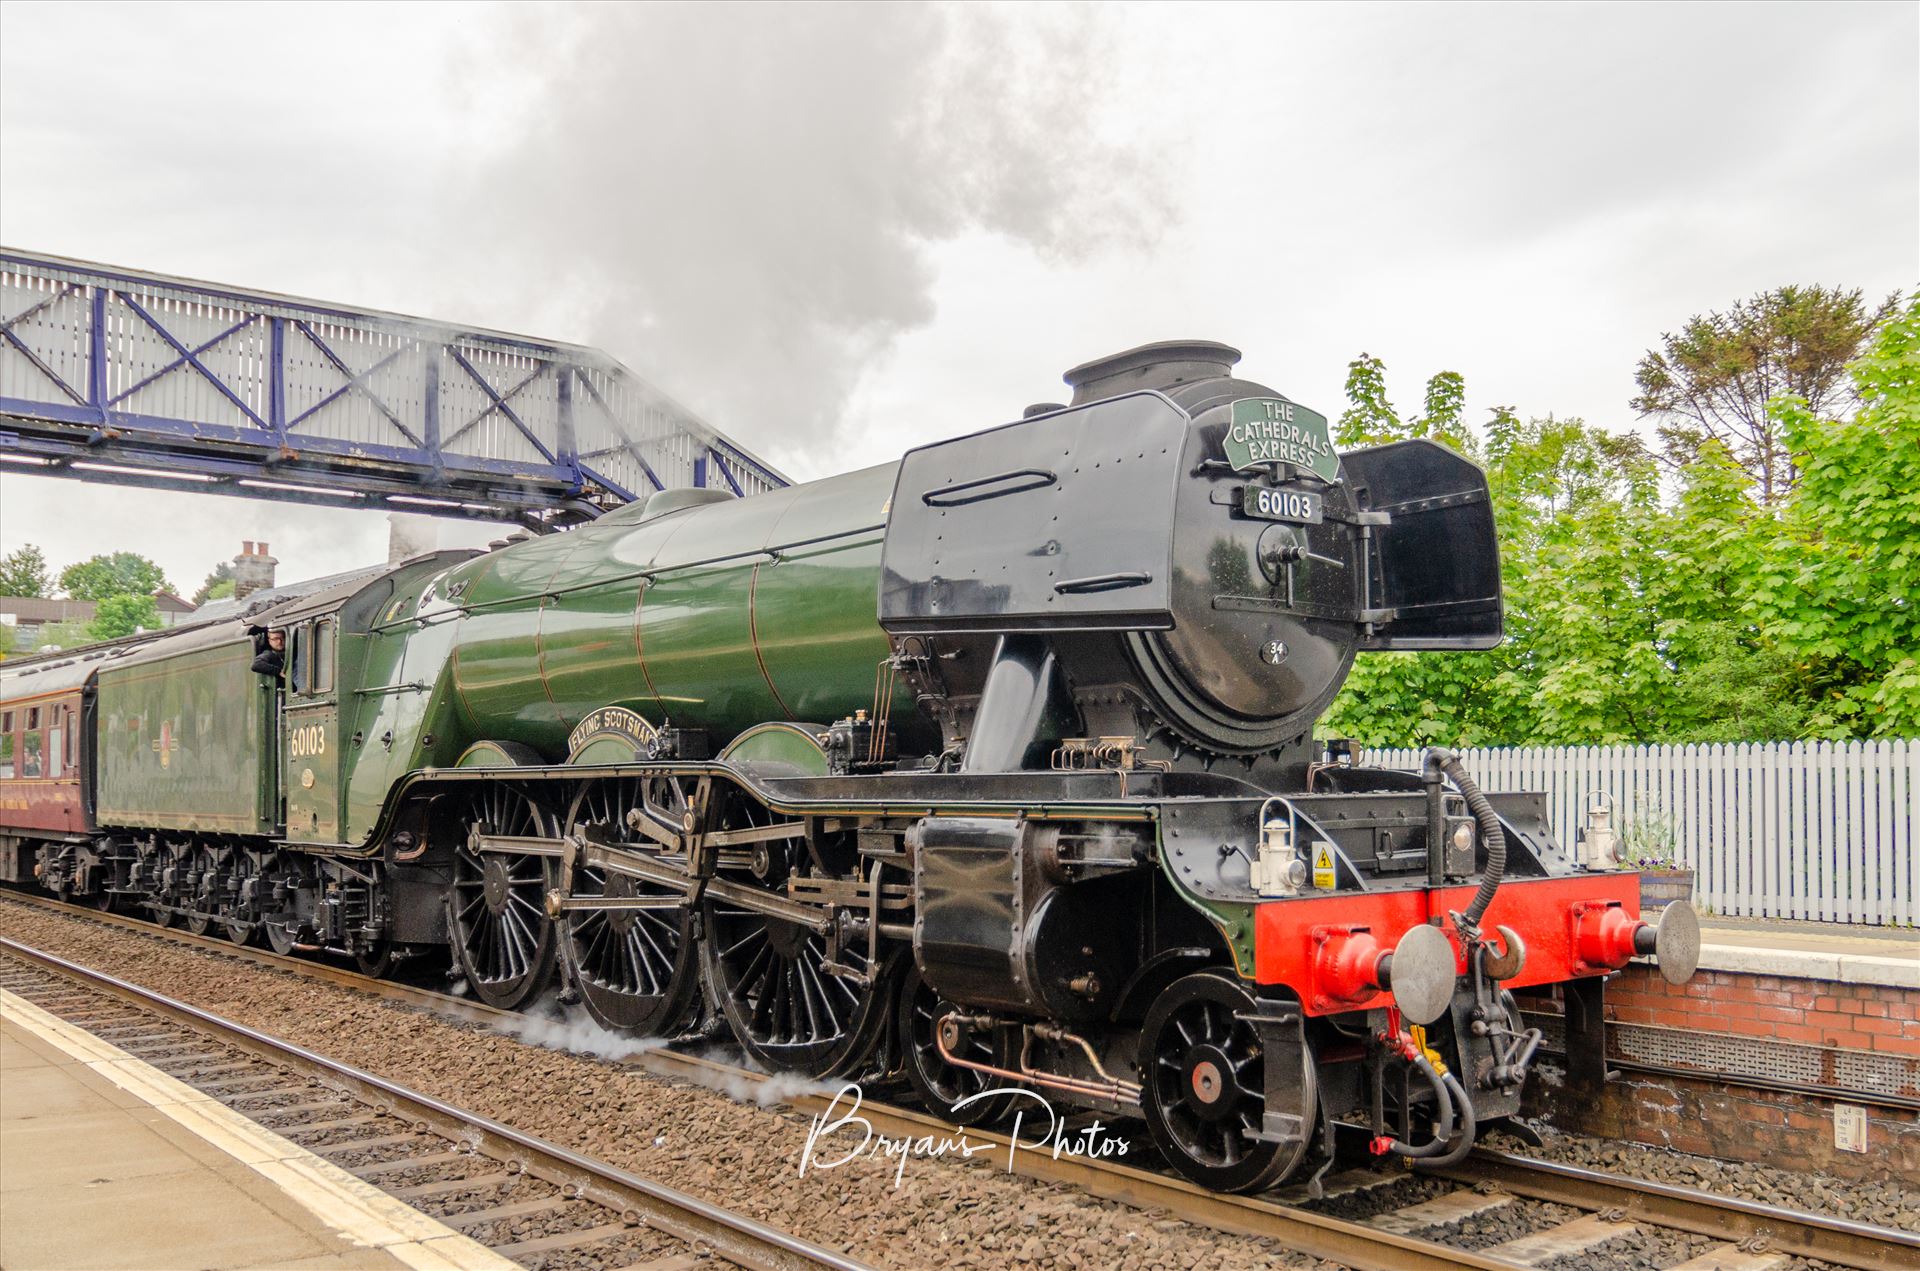 The Scotsman at North Queensferry A photograph of the Flying Scotsman passing through North Queens ferry as it heads back to Edinburgh via the Forth Rail Bridge by Bryans Photos